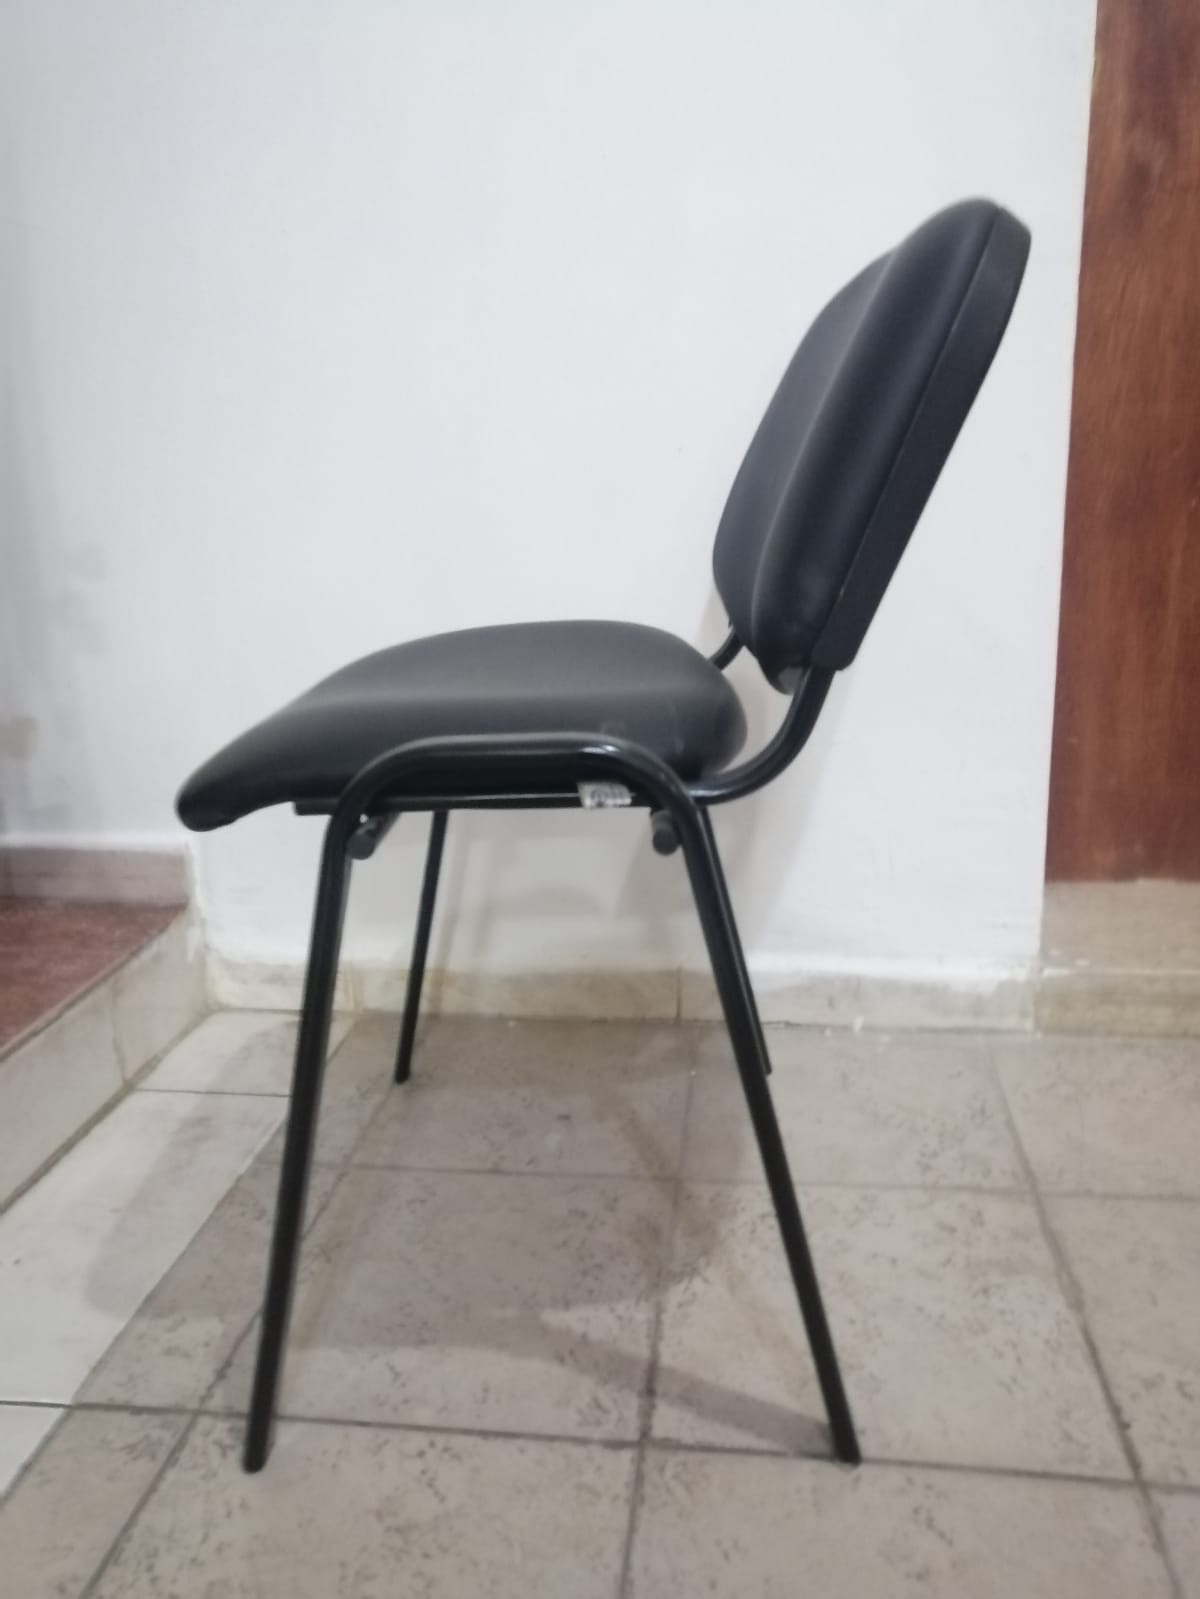 Cushion Chairs for sale